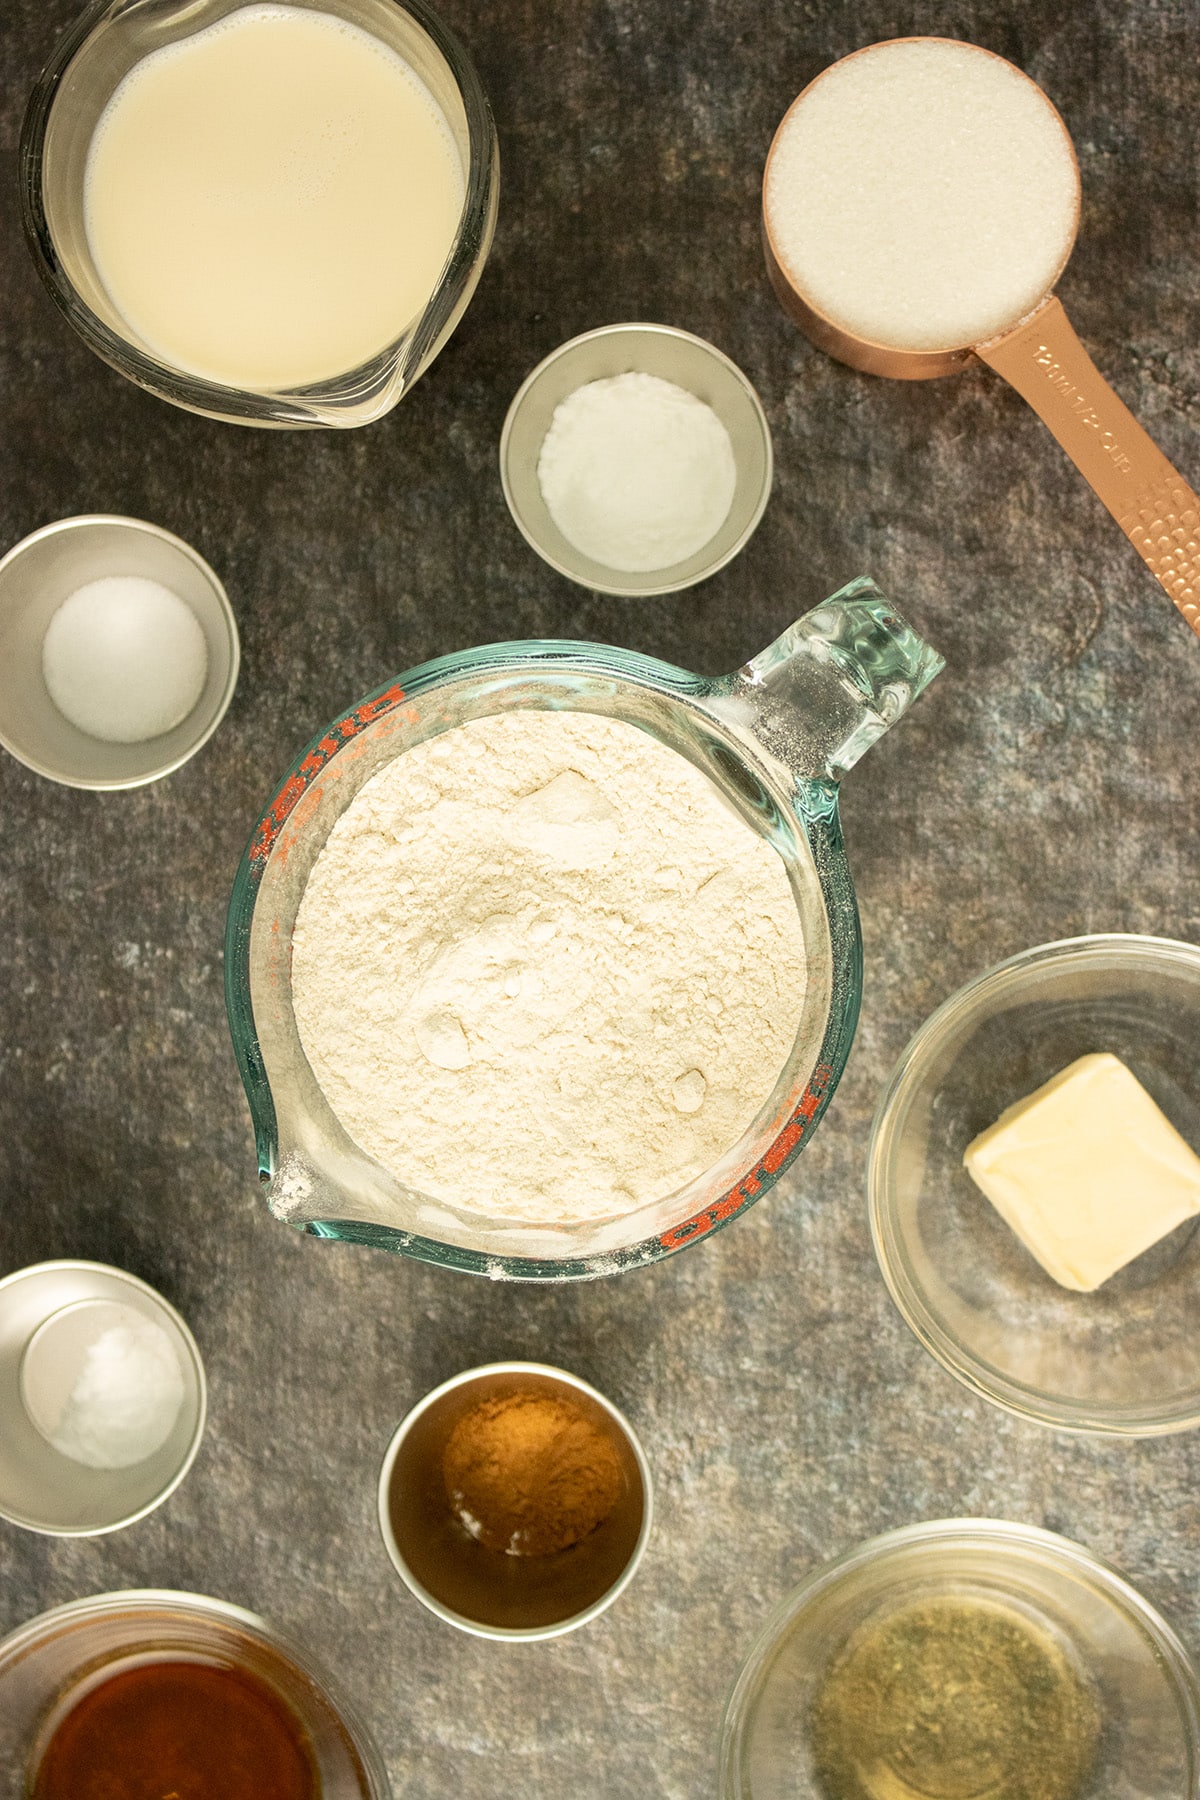 white wheat flour in a measuring cup surrounded by other scones ingredients